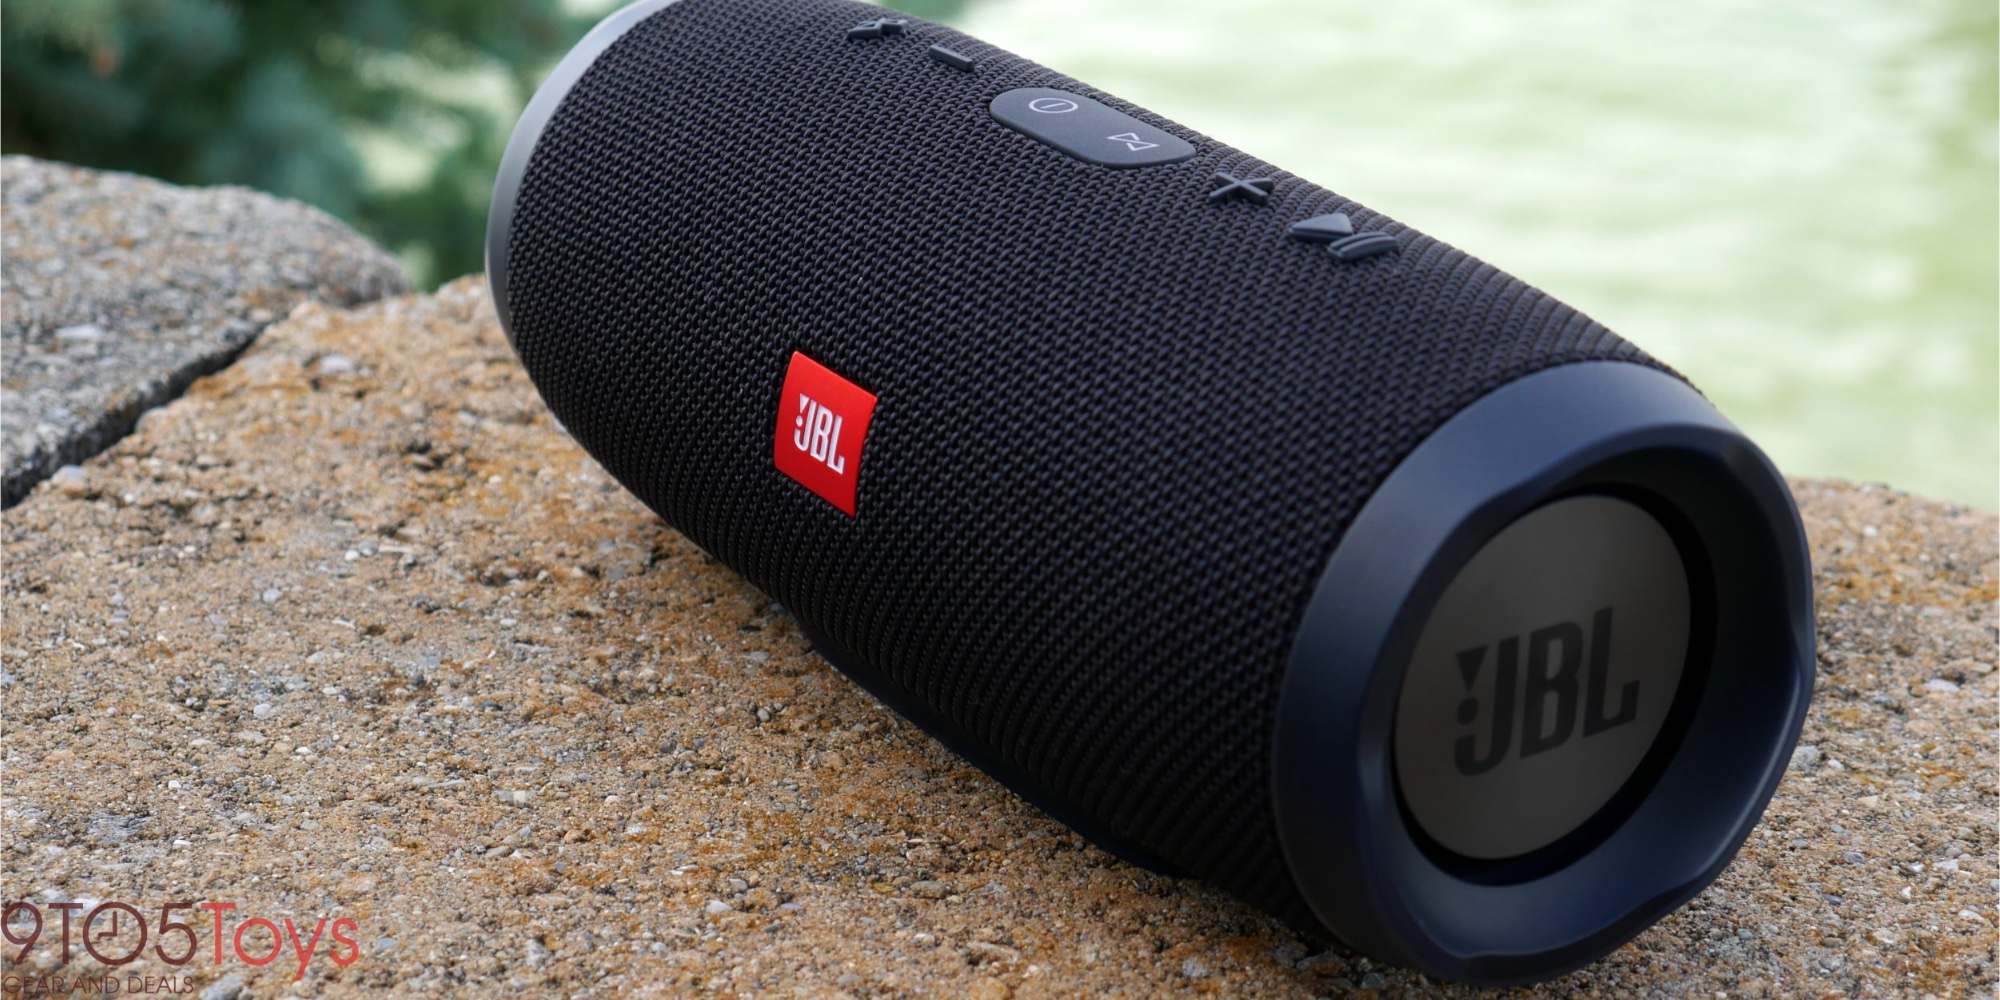 JBL Charge 3 provides 20-hours of audio in a waterproof design